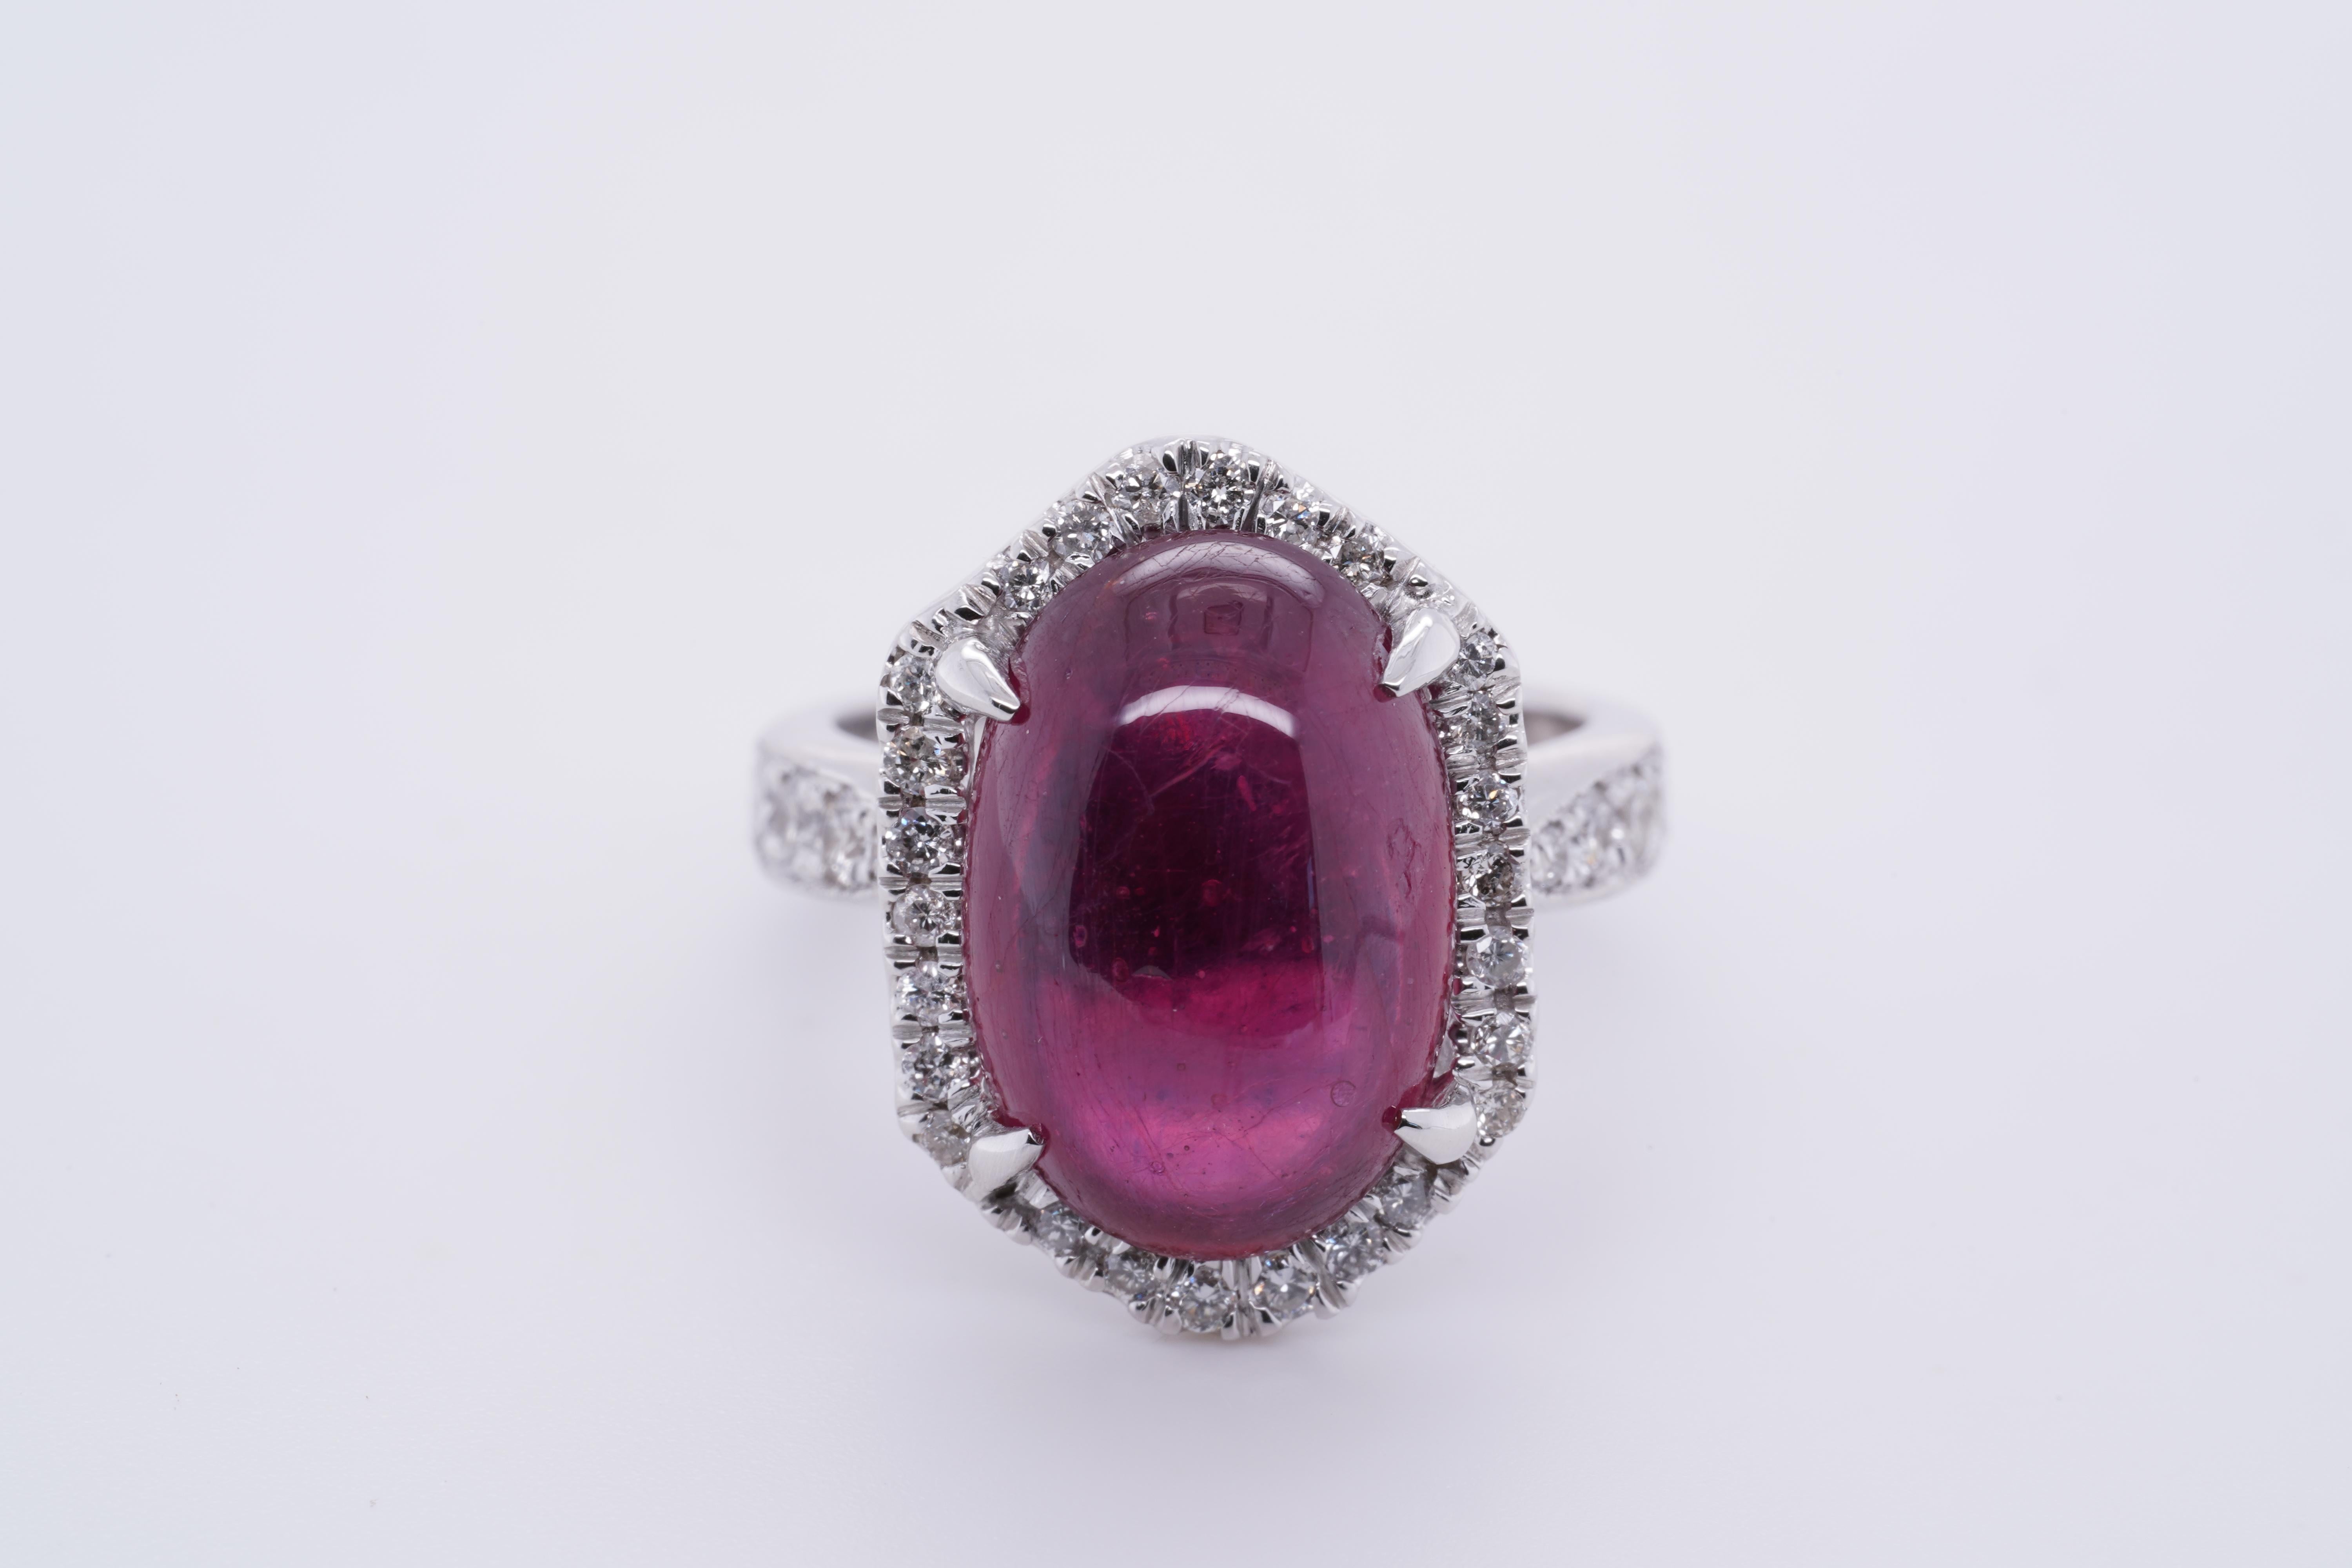 11 Carat Ruby Cabochon, Dome, with Diamonds, Cocktail Ring 11